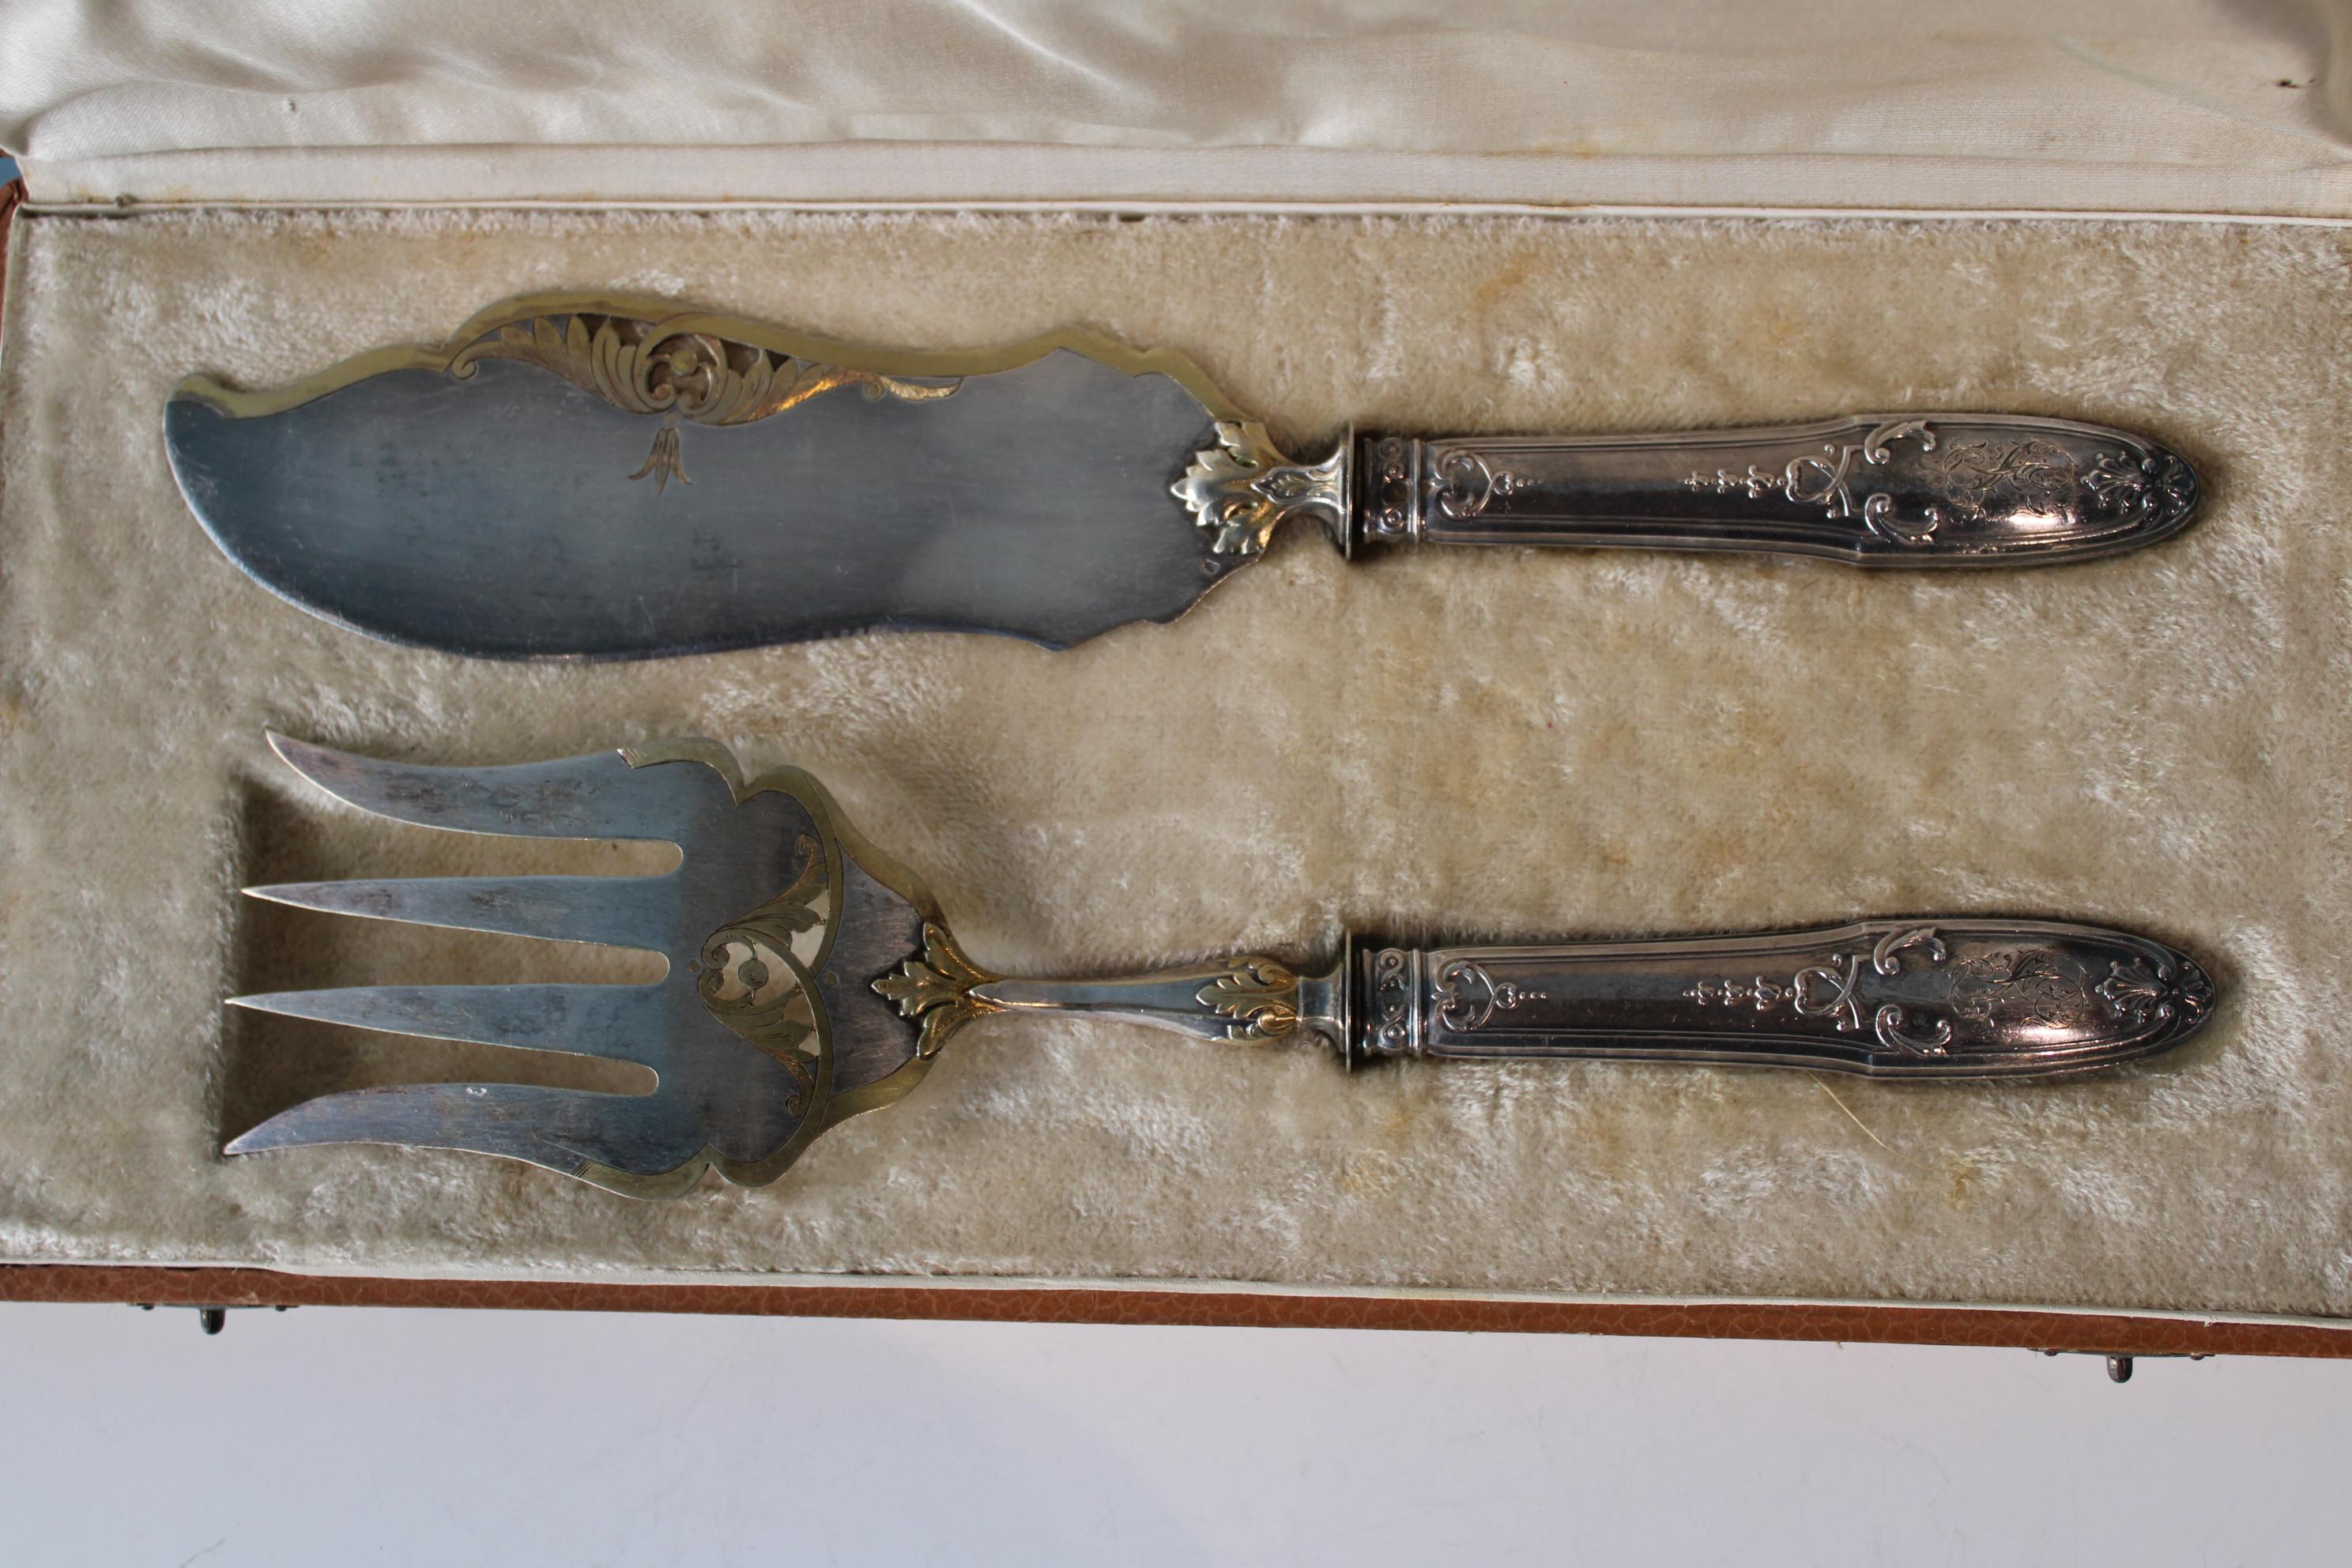 Silver and gold metal serving cutlery in their box

Cutlery dimensions : H 28 cm
Box dimensions : 34 x 16 x 4 cm 